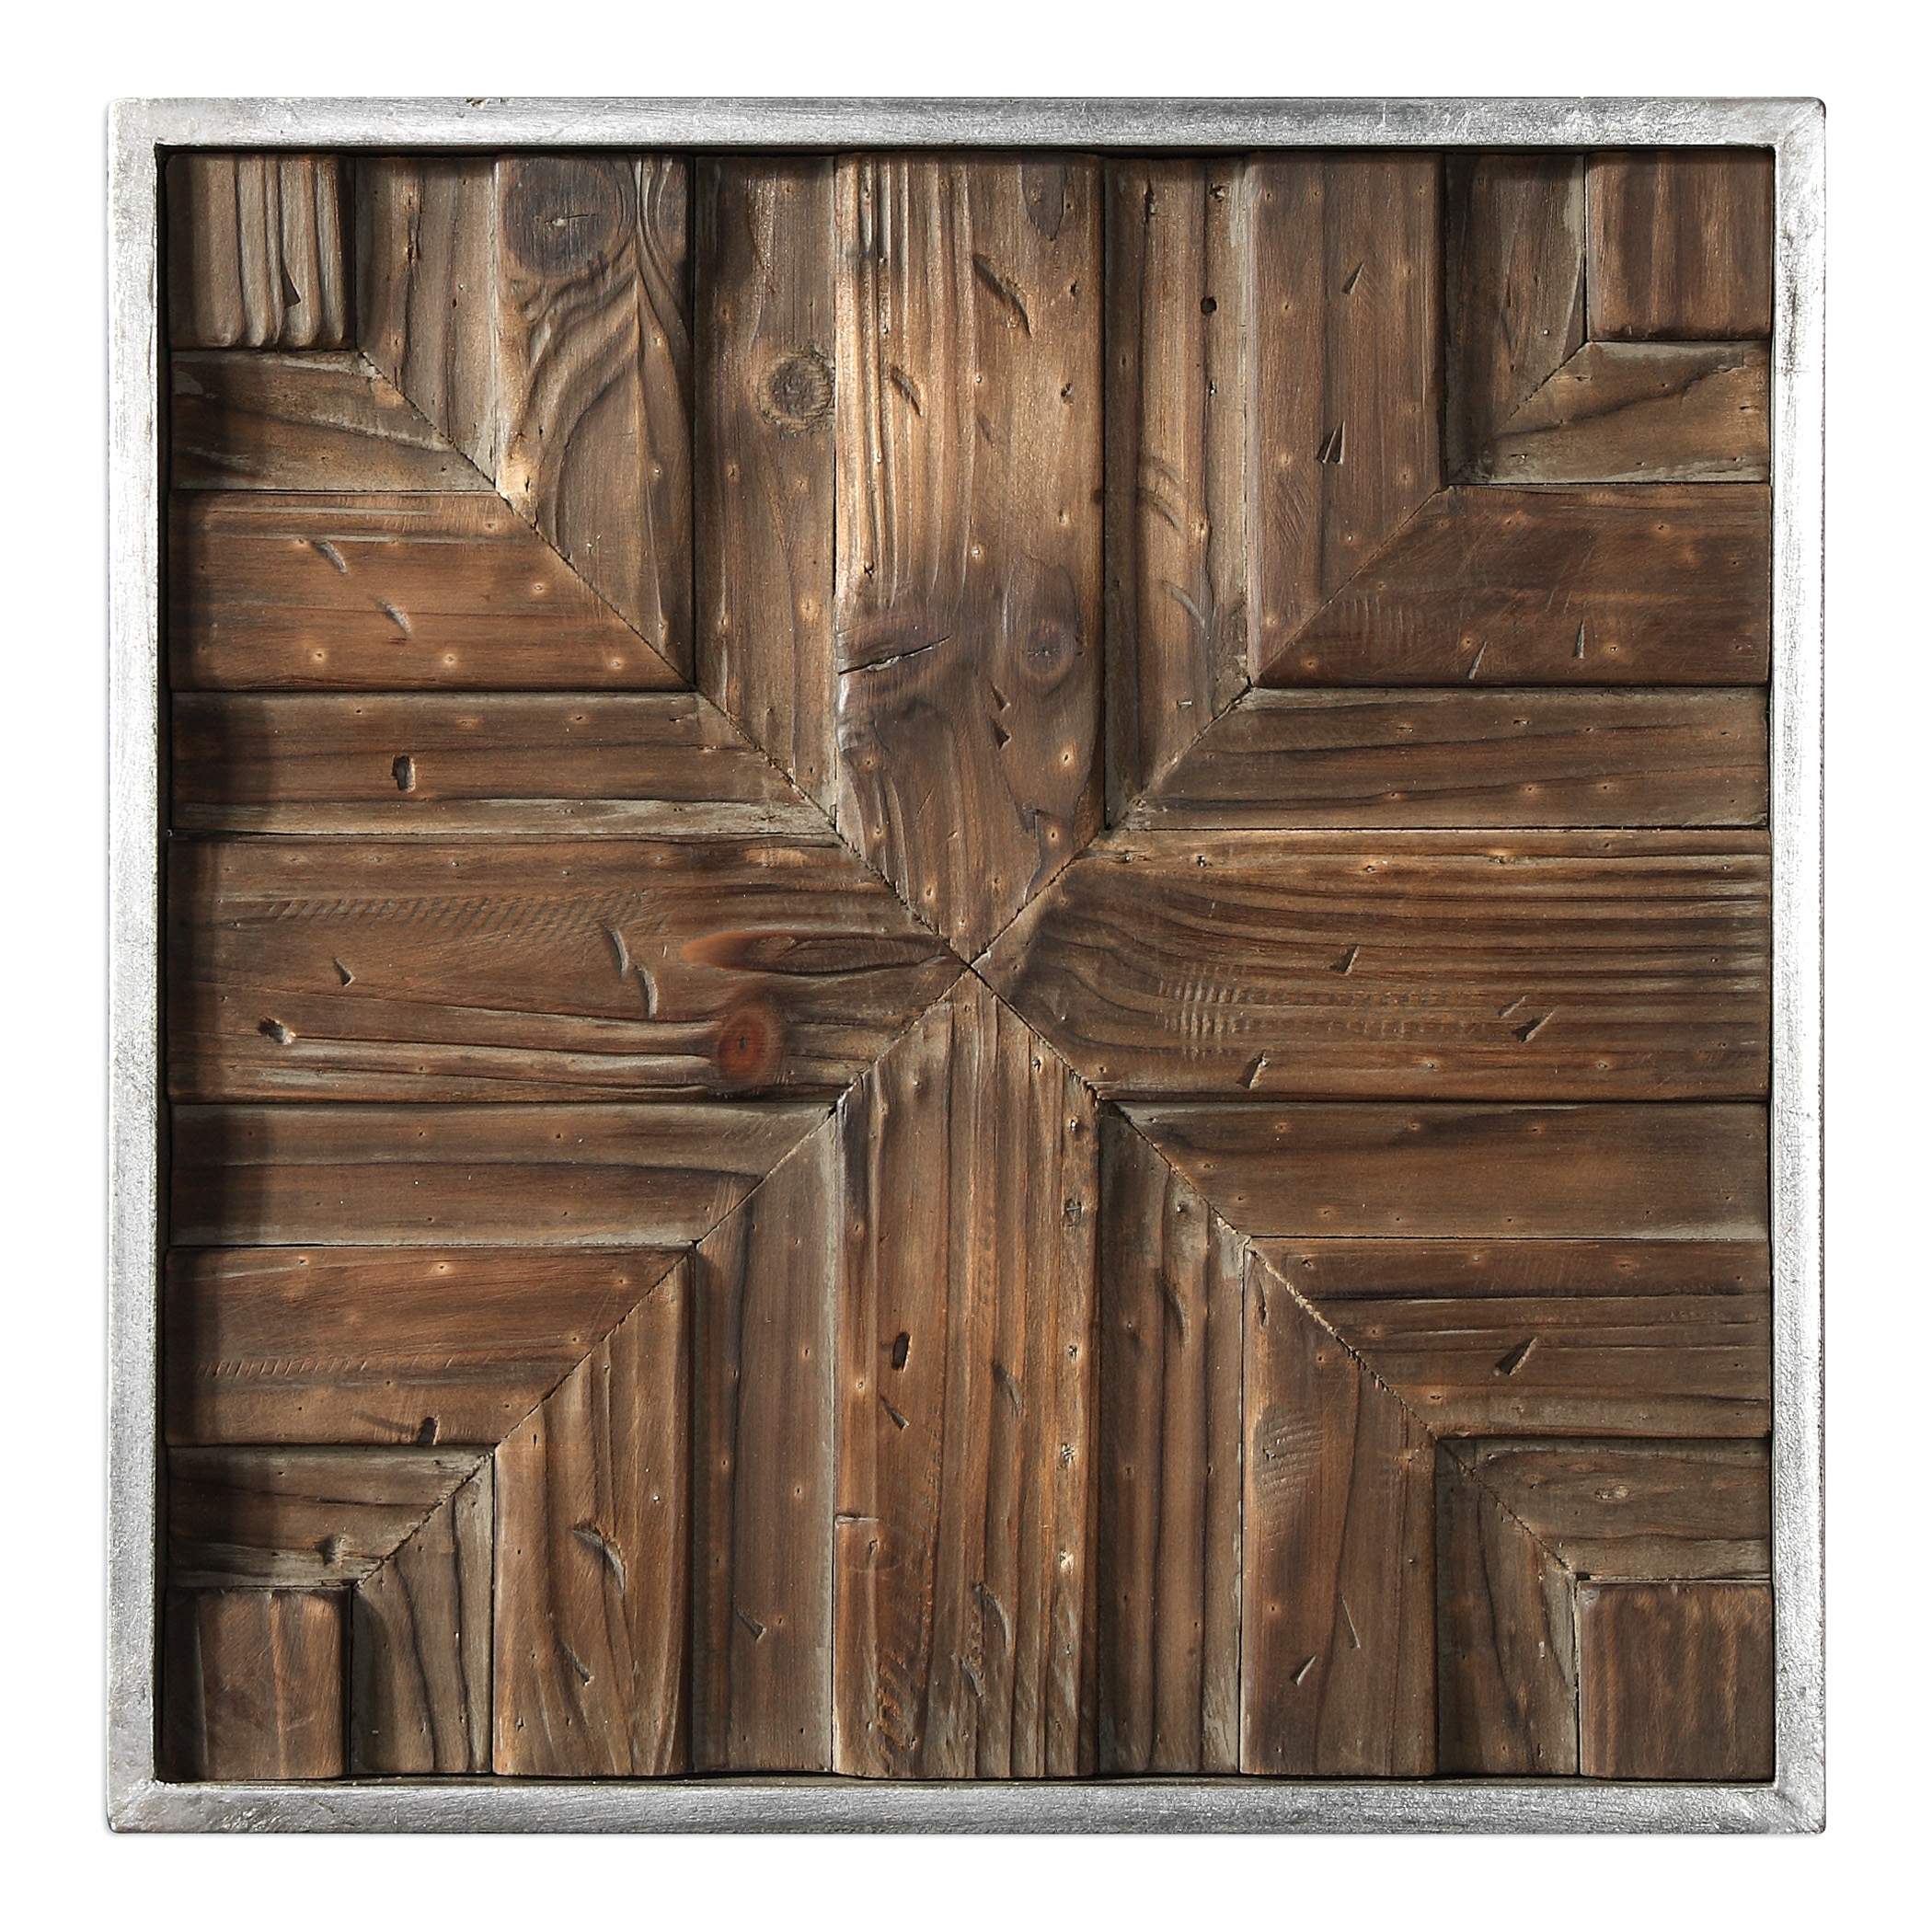 Bryndle Rustic Wooden Squares S/9 - Image 1